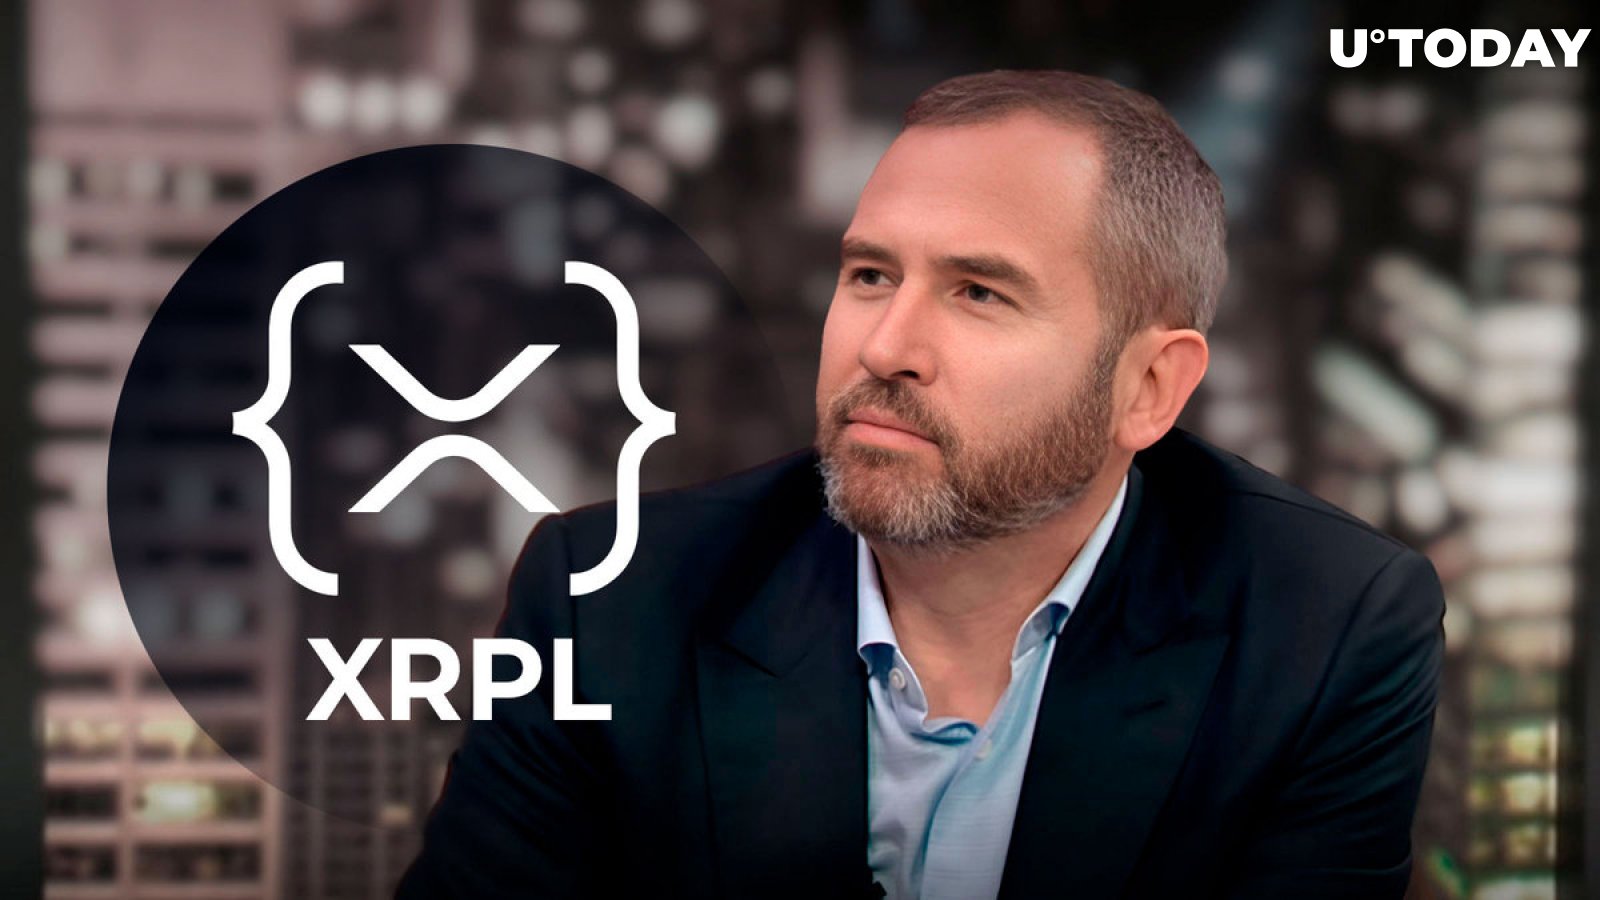 Ripple CEO Excited as Company Takes Giant Step Toward XRP Ledger Adoption